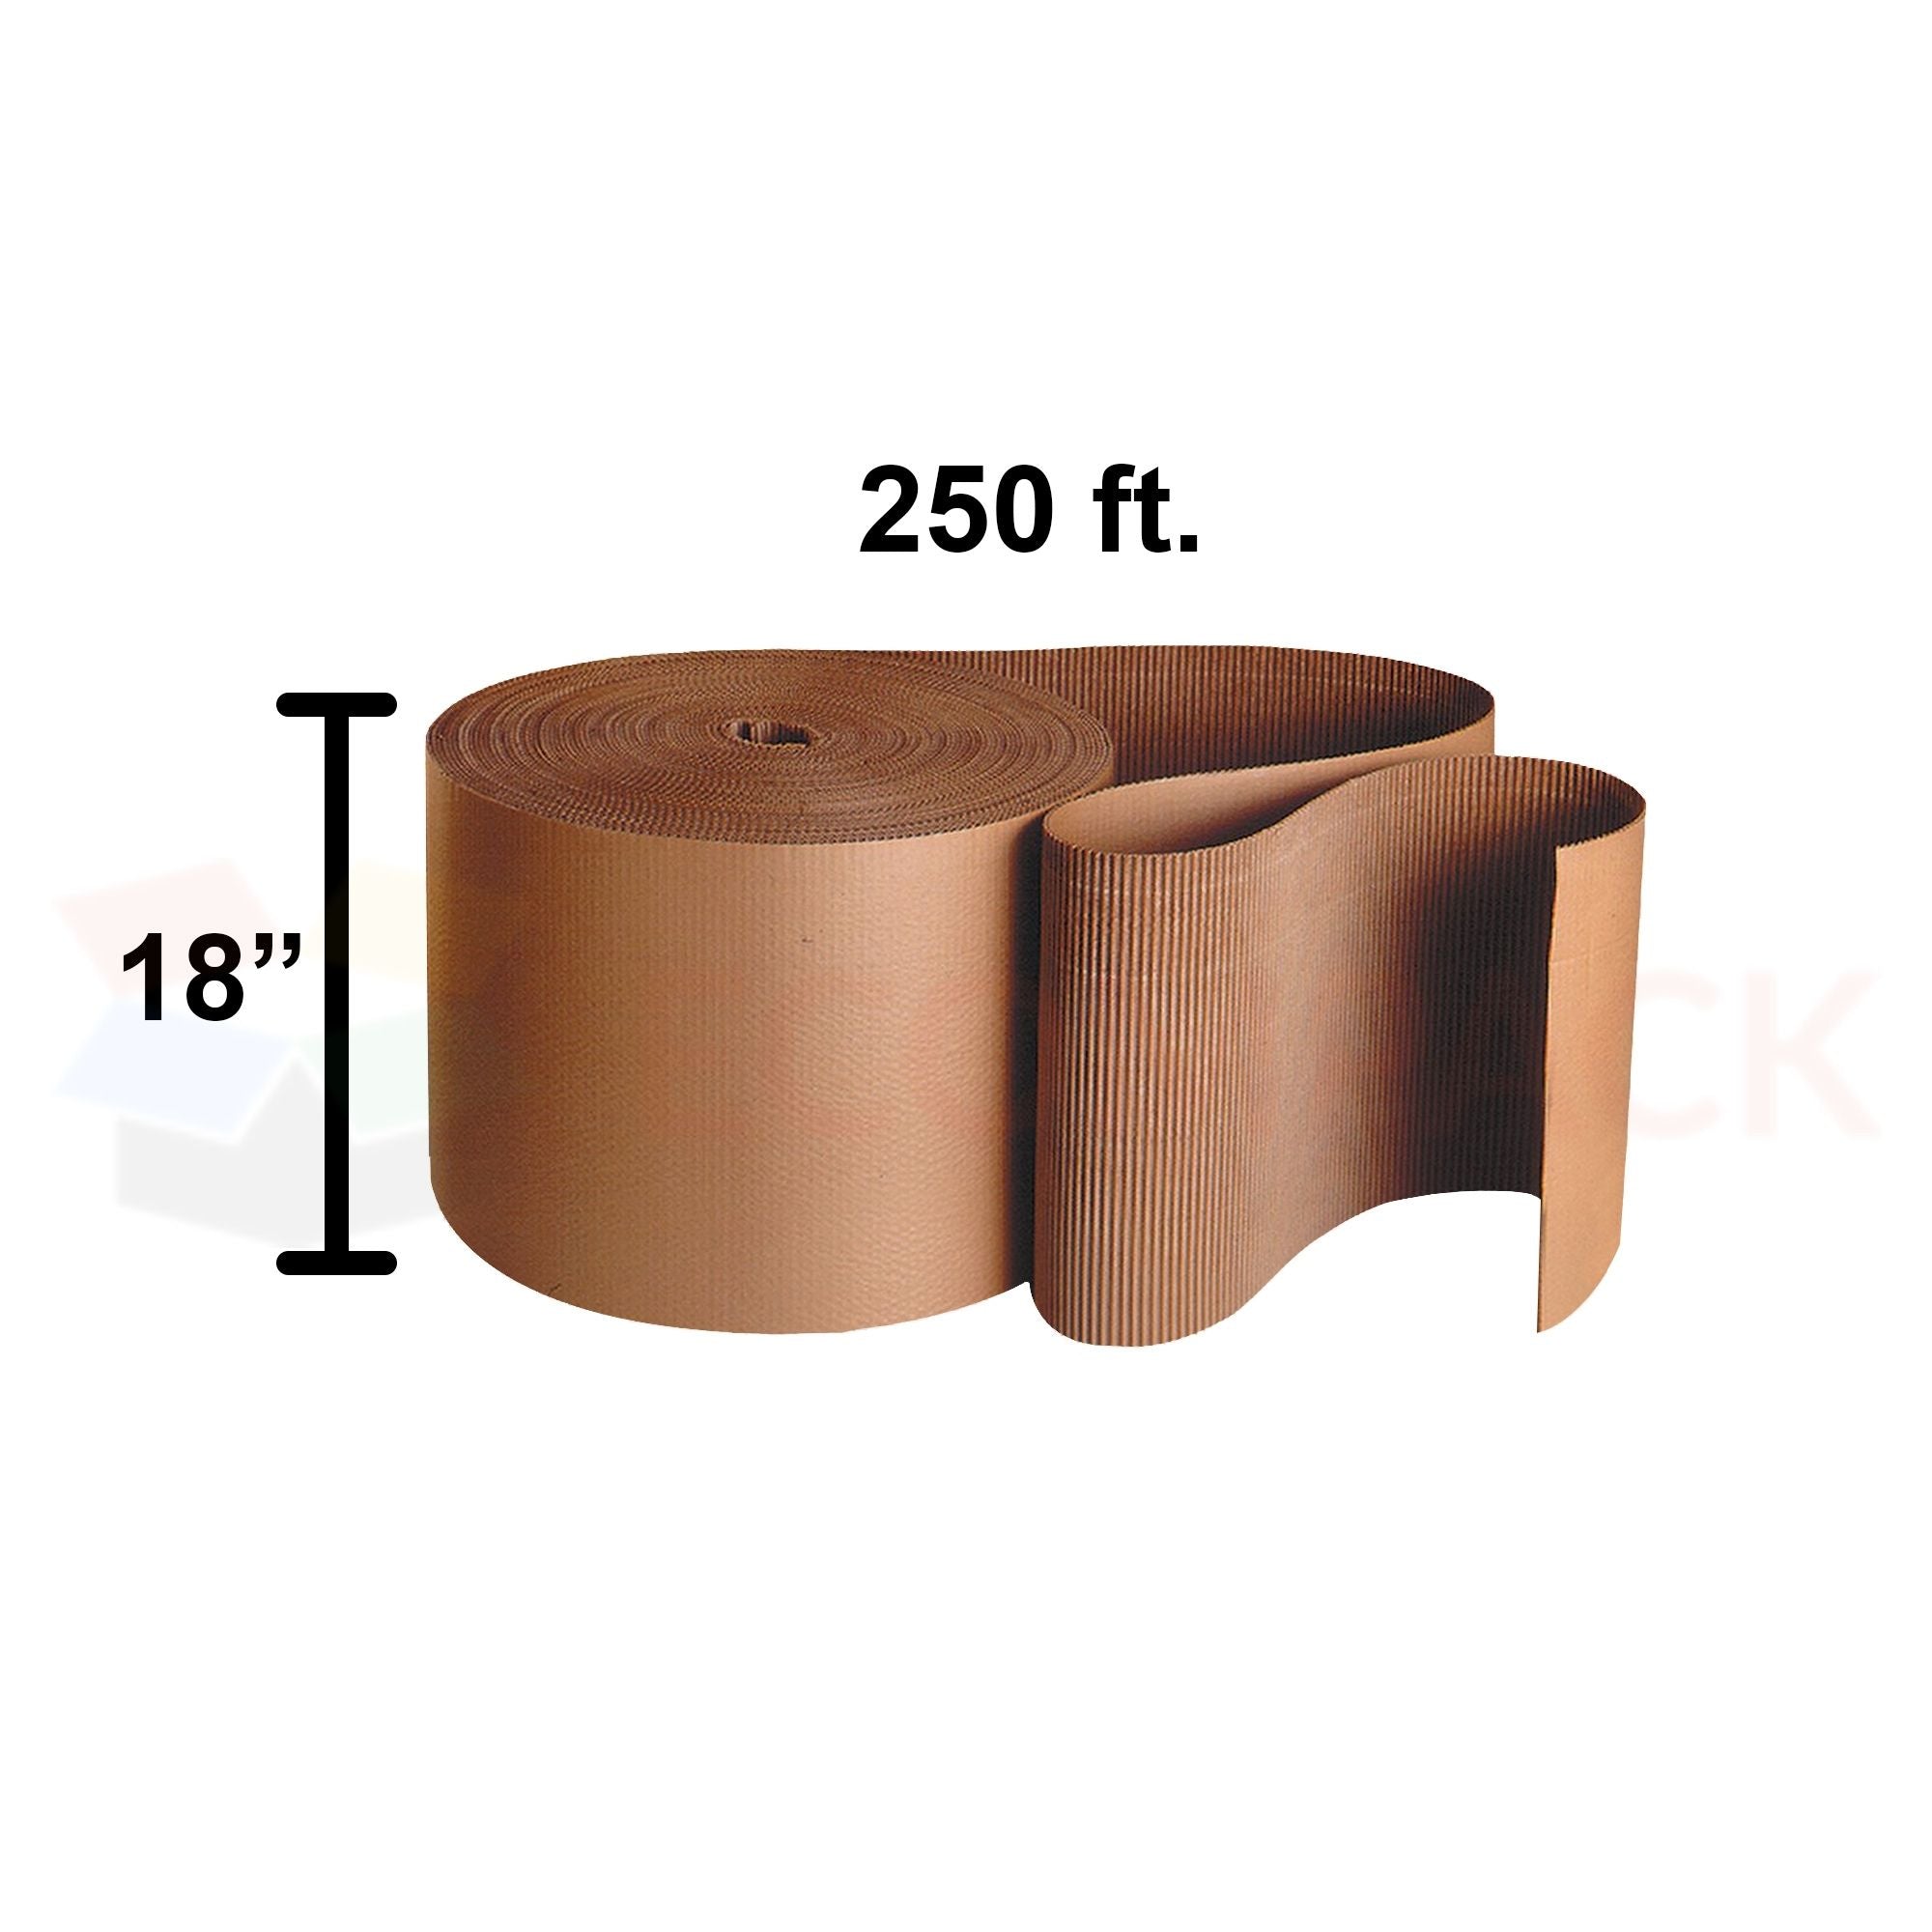 36 x 250' Singleface Corrugated Cardboard Roll - Packaging Price